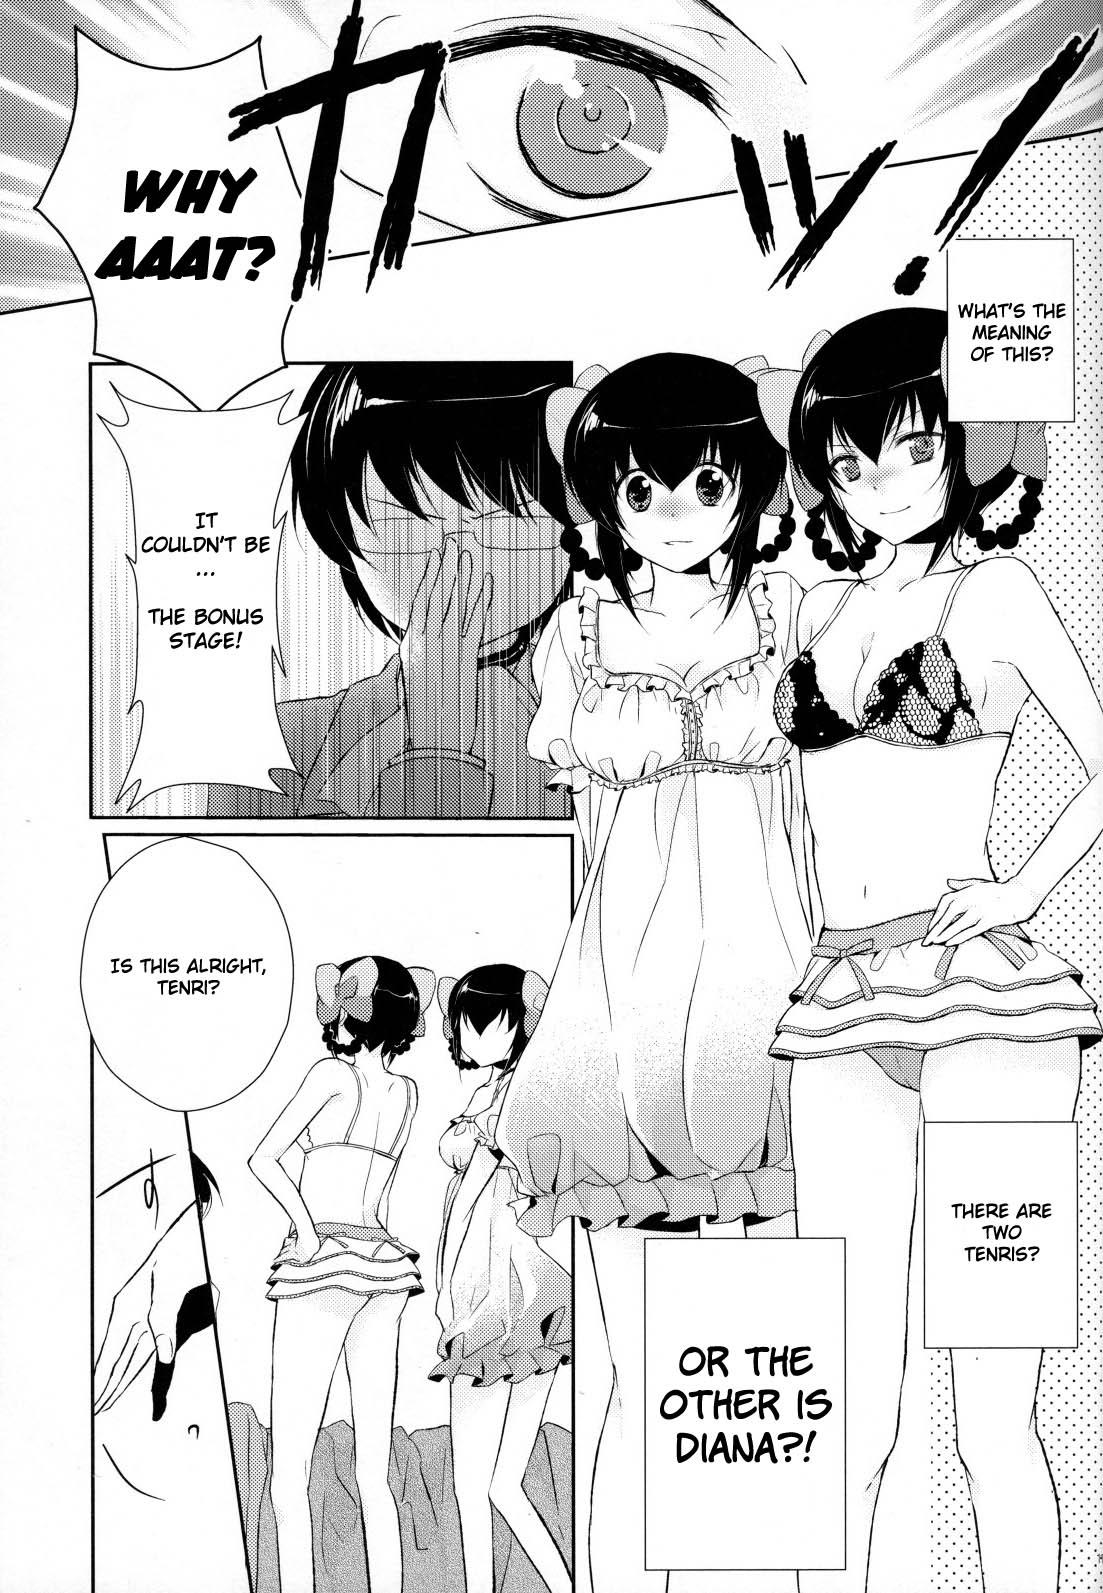 Gay Public Kamisama no Hentai Play Nikkichou 2 | Kamisama's Hentai Play Diary 2 - The world god only knows Free Amateur Porn - Page 10